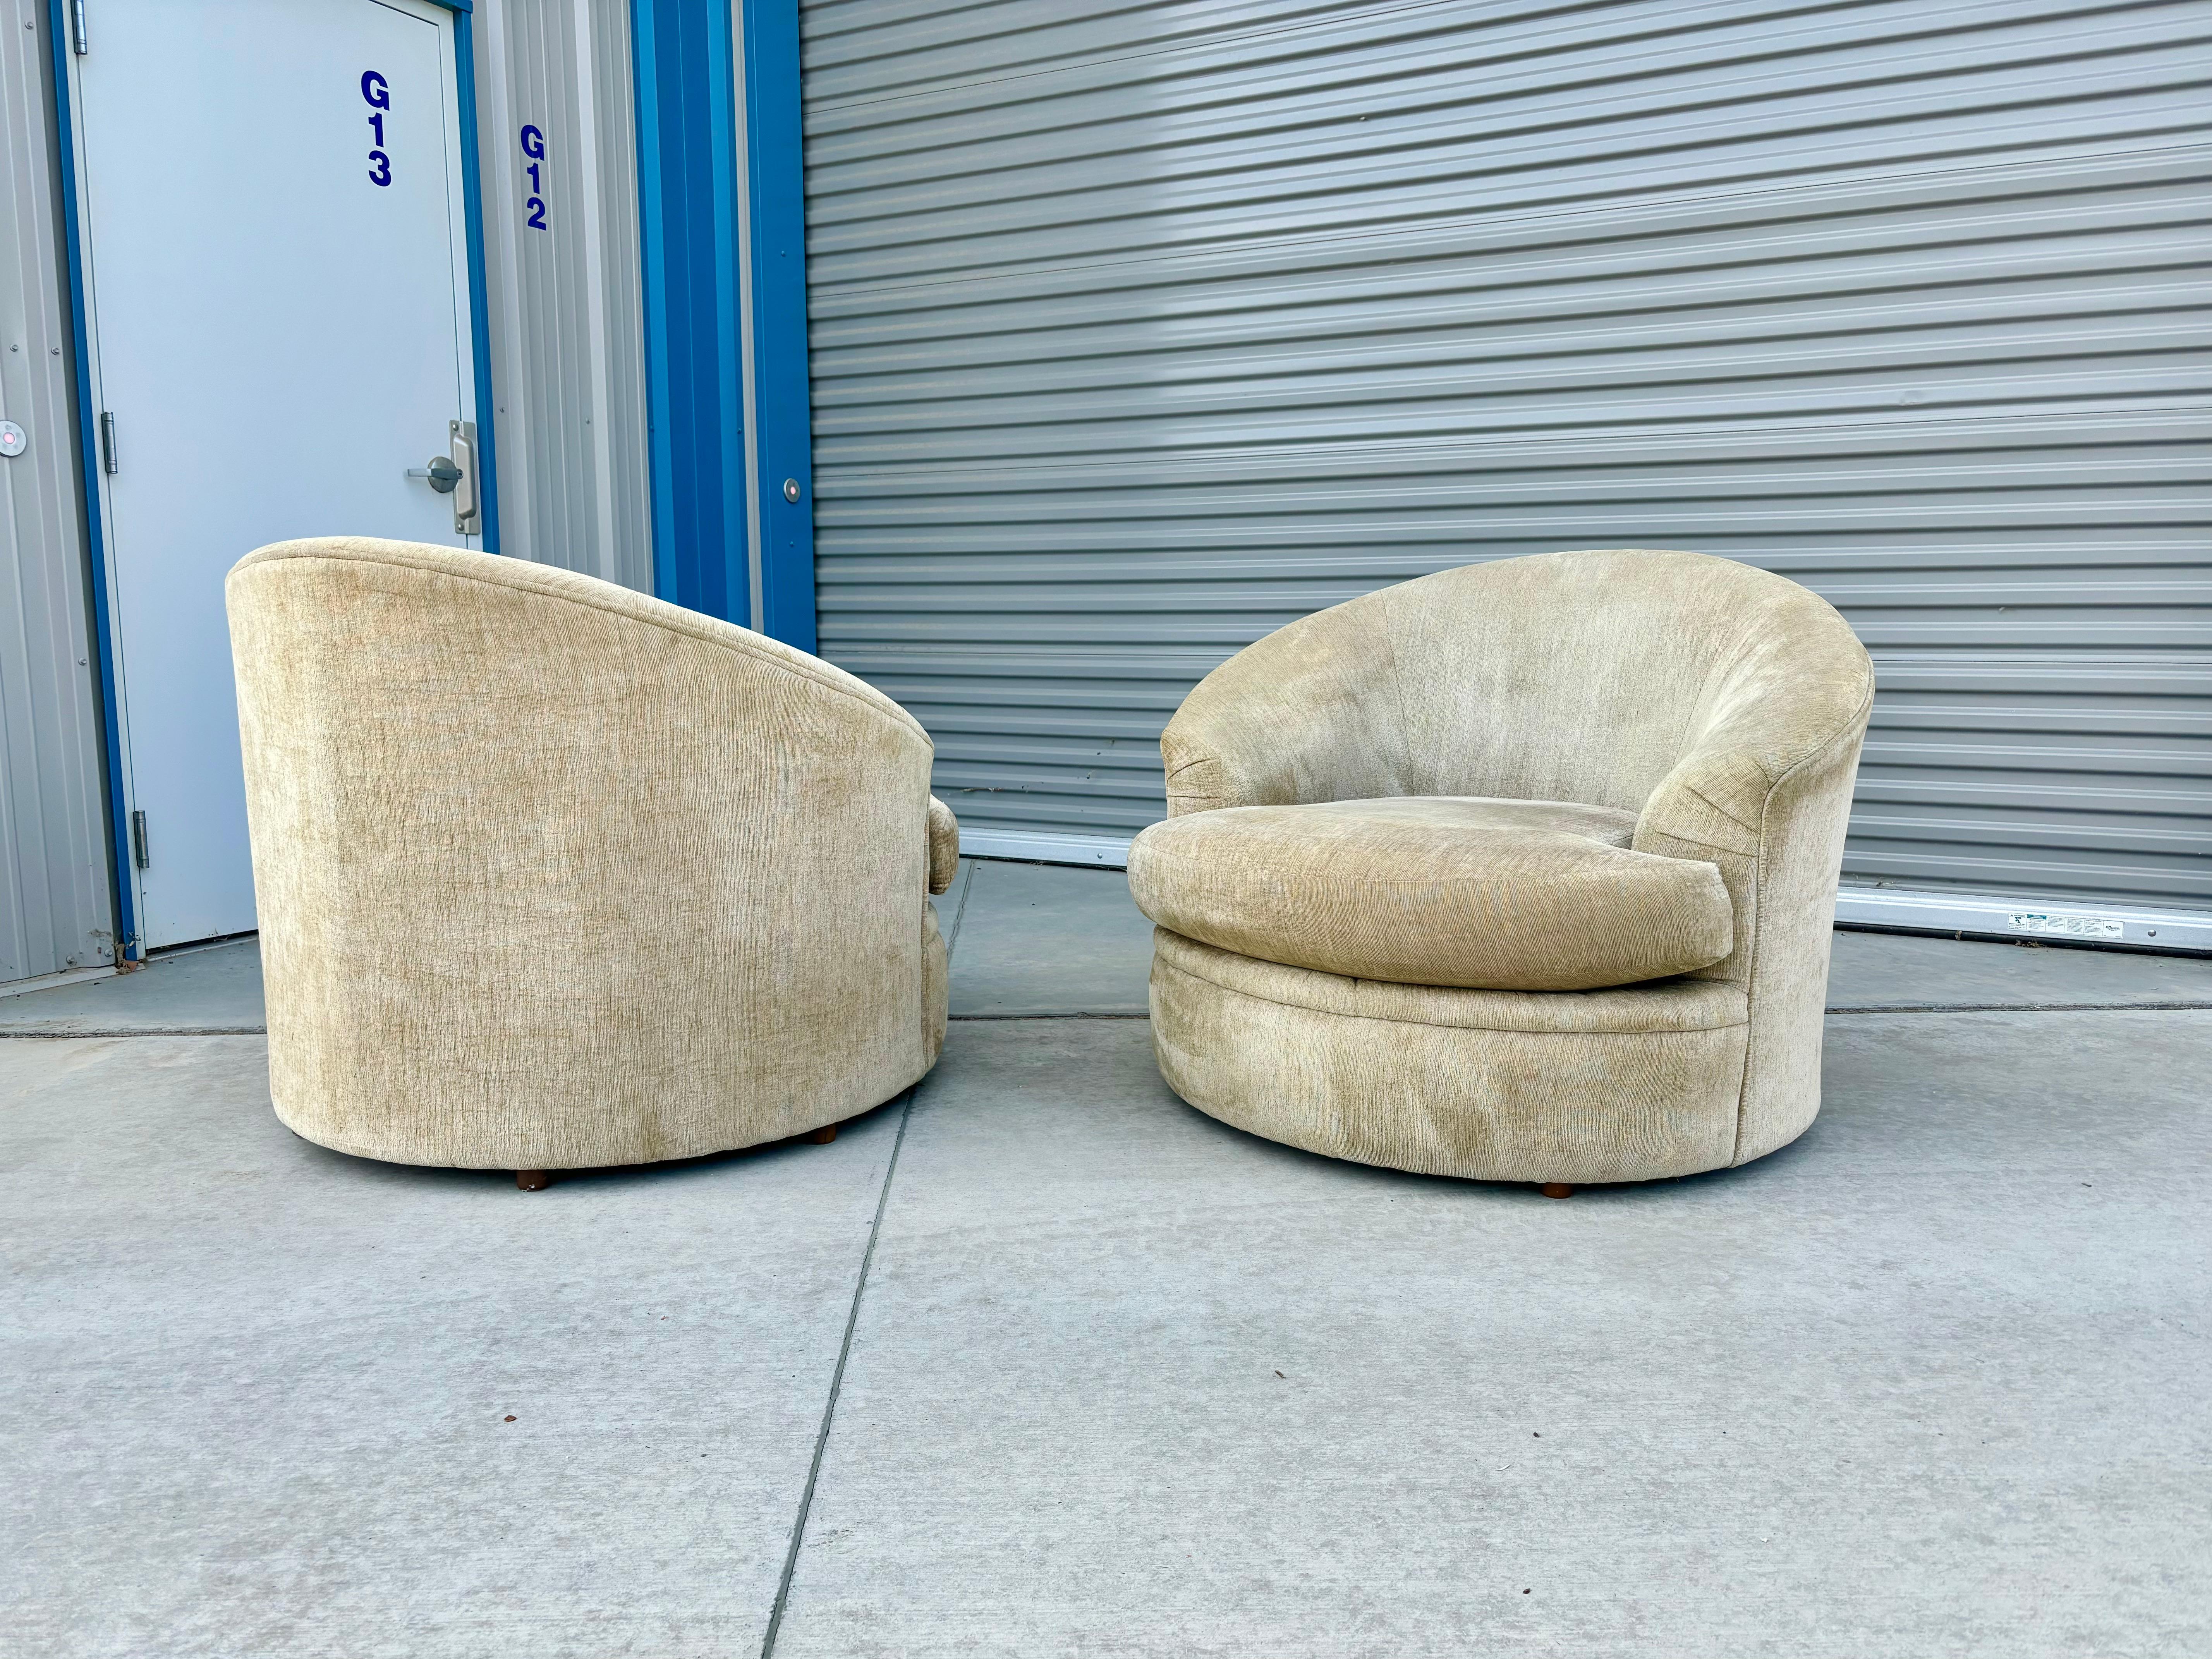 Late 20th Century 1970s Mid Century Modern Lounge Chairs - Set of 2 For Sale